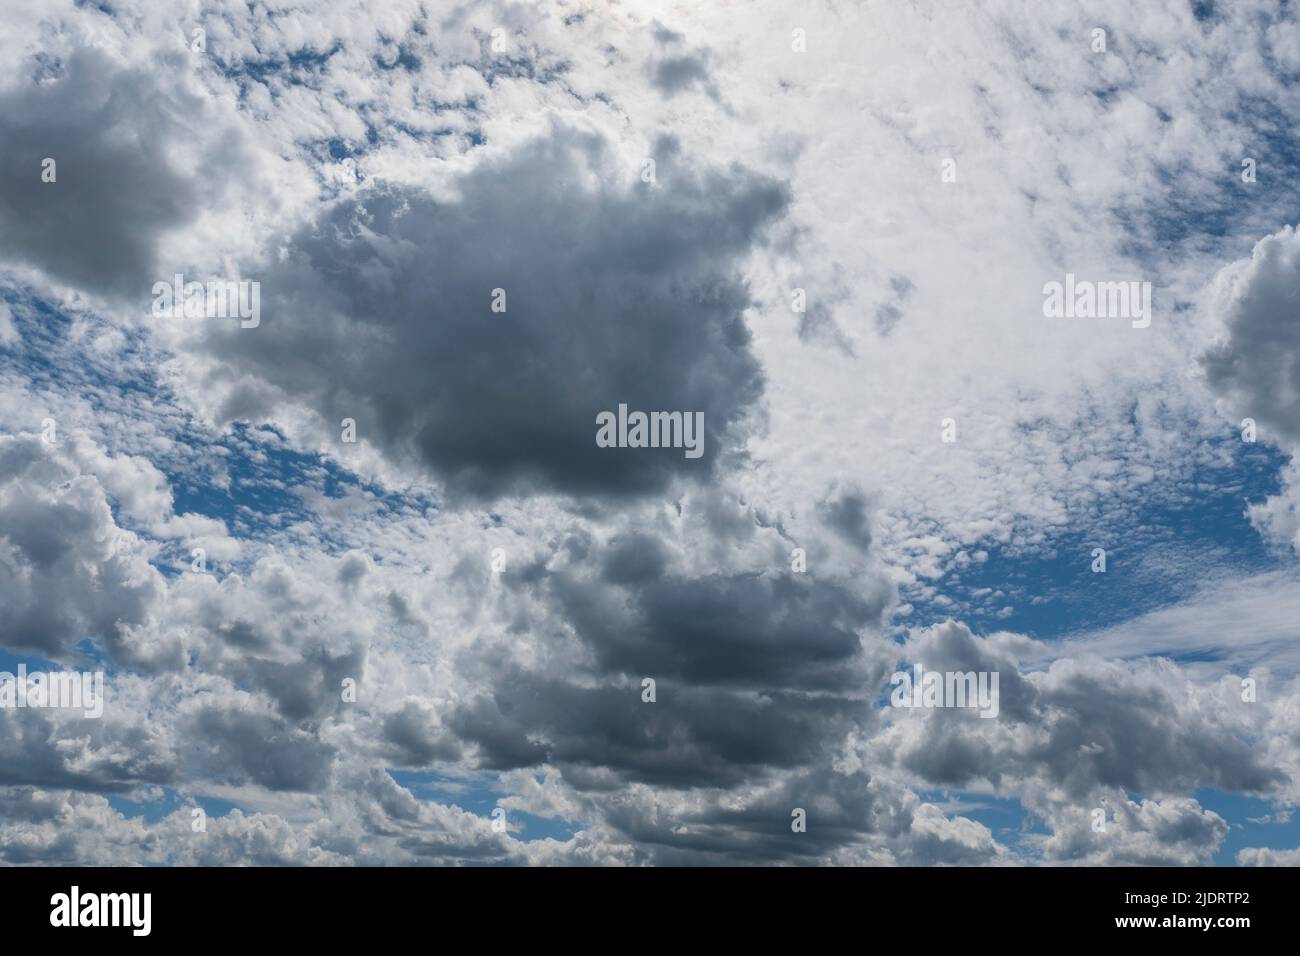 Blue sky with different types of clouds at different altitudes Stock Photo